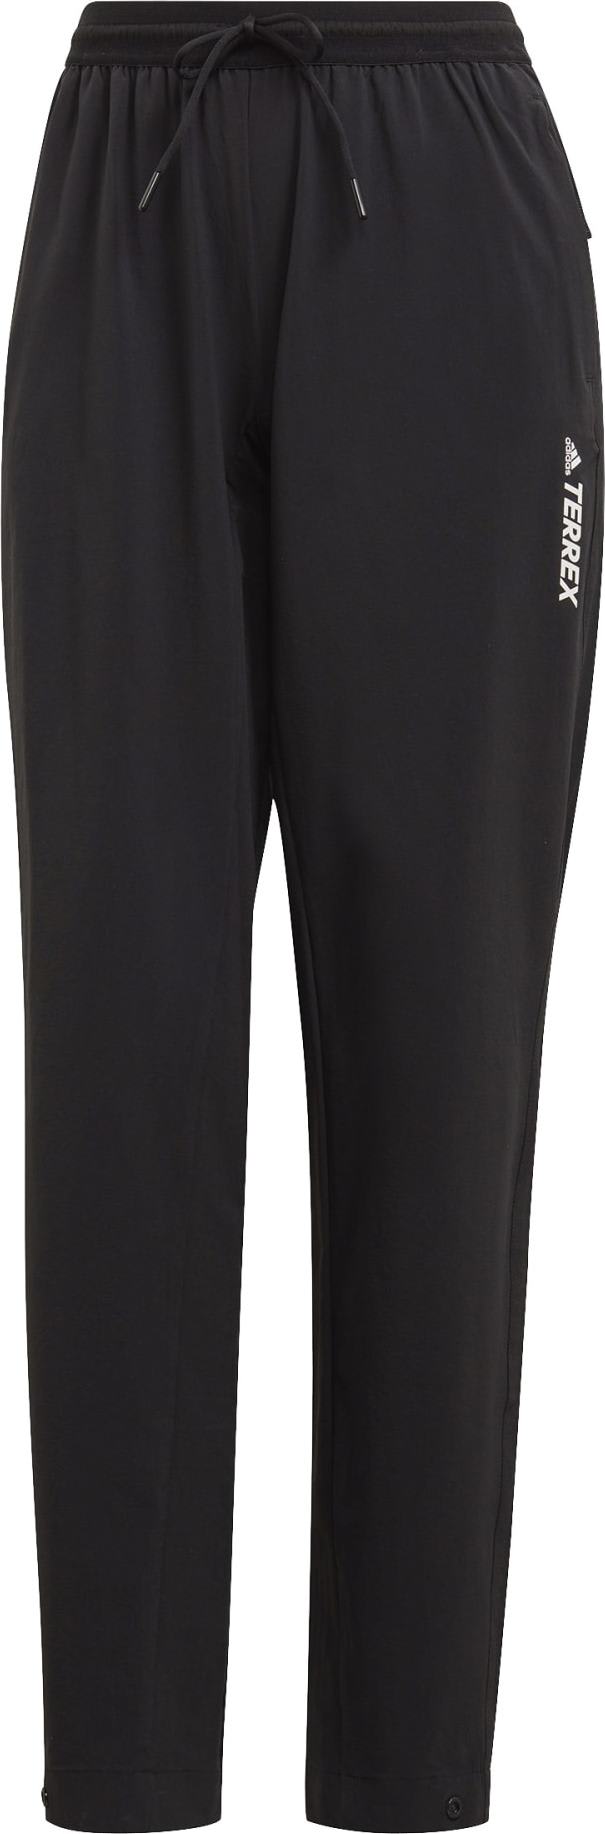 Buy Adidas Women's Terrex Liteflex Hiking Tracksuit Bottoms from Outnorth